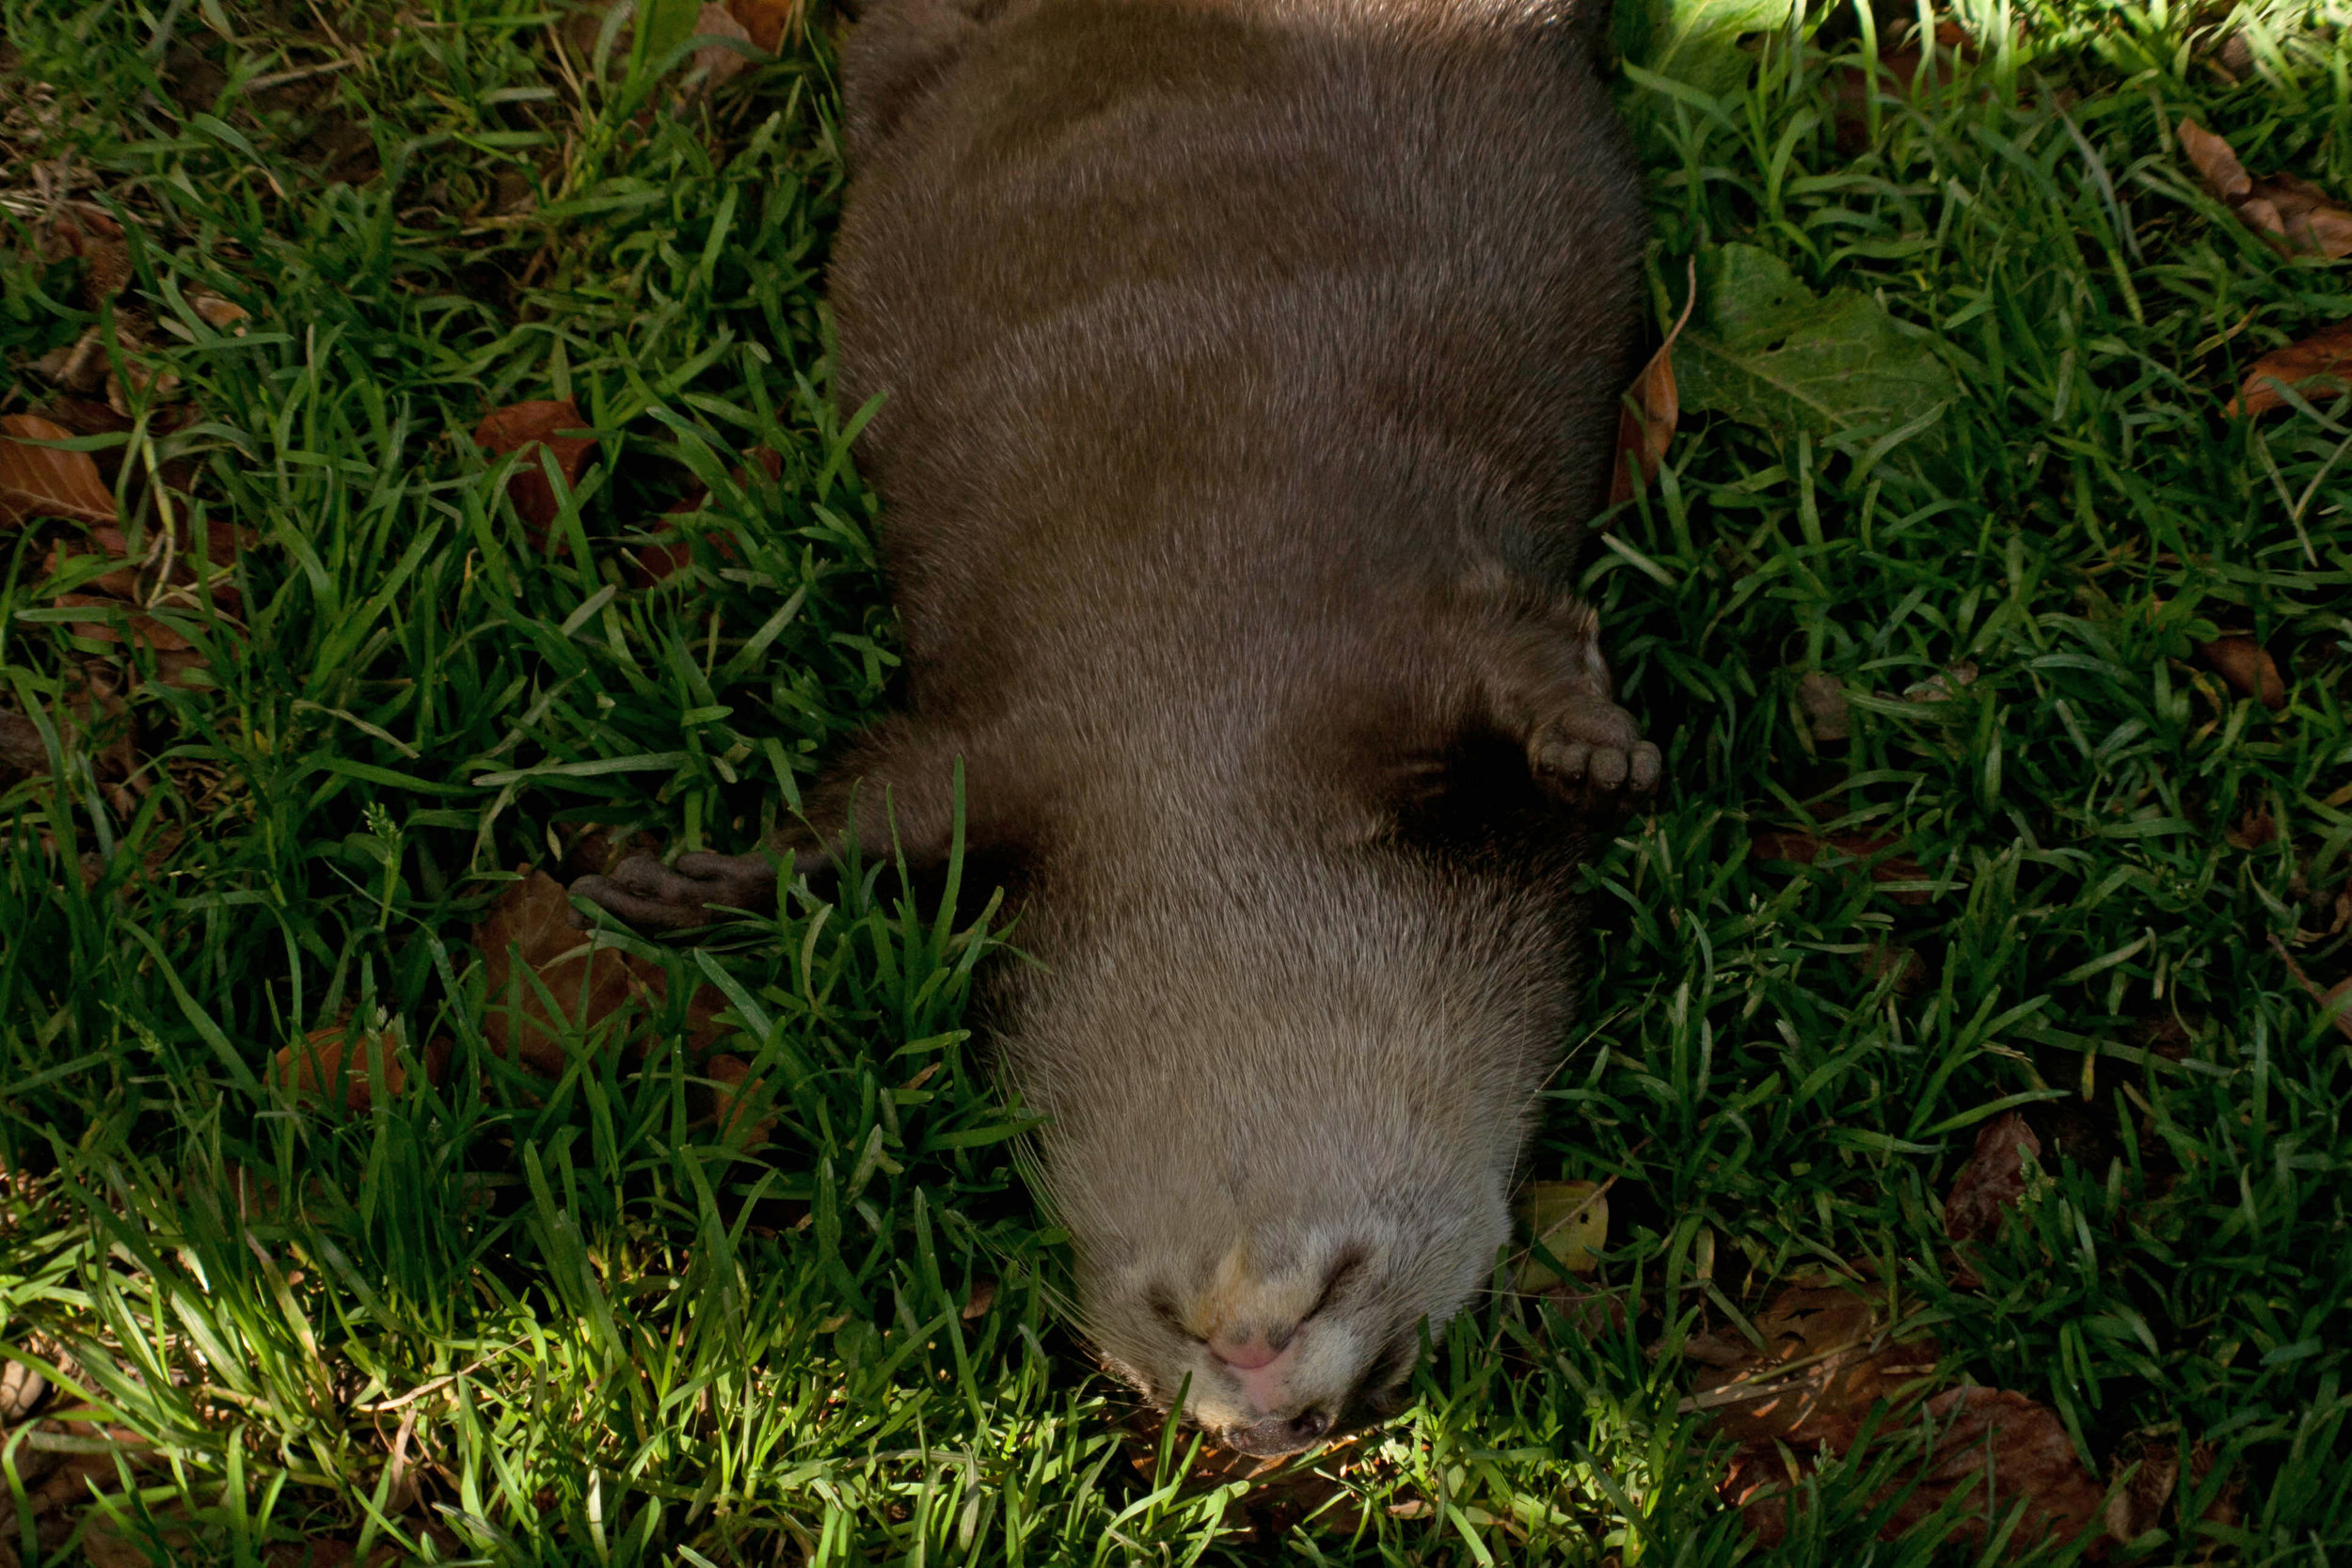 Otter Gets Some Serious Relaxing Done in the Grass